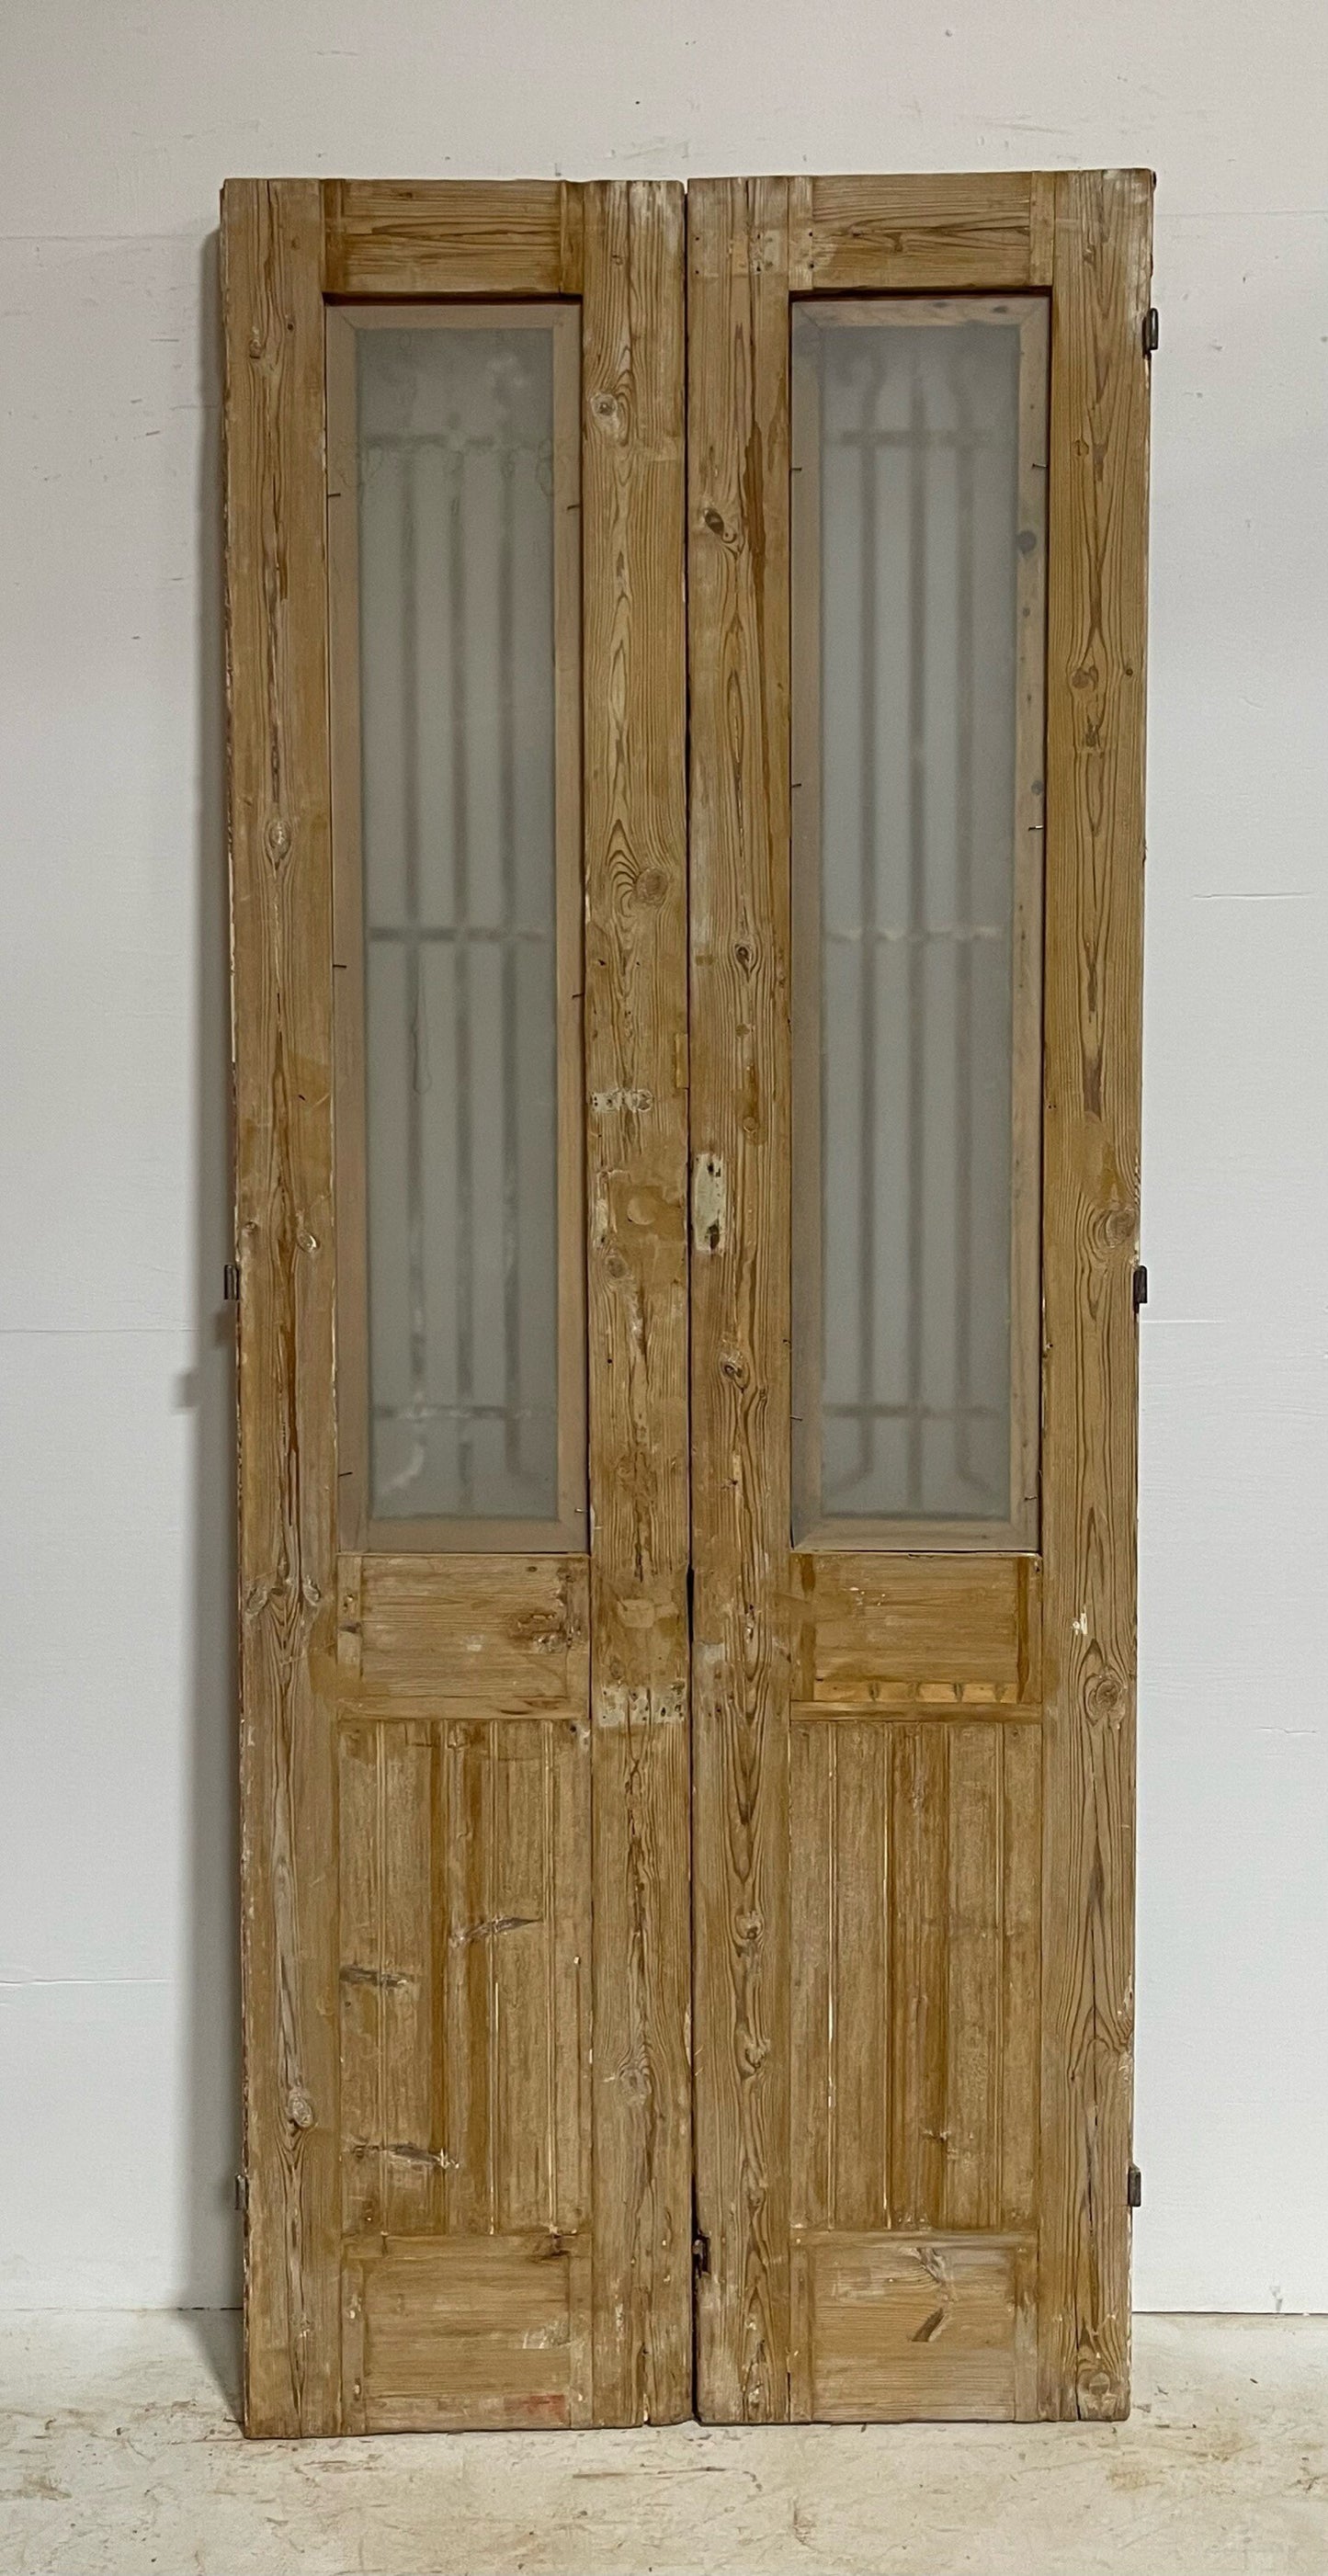 Antique French doors (97.25X39.5) with metal G1523